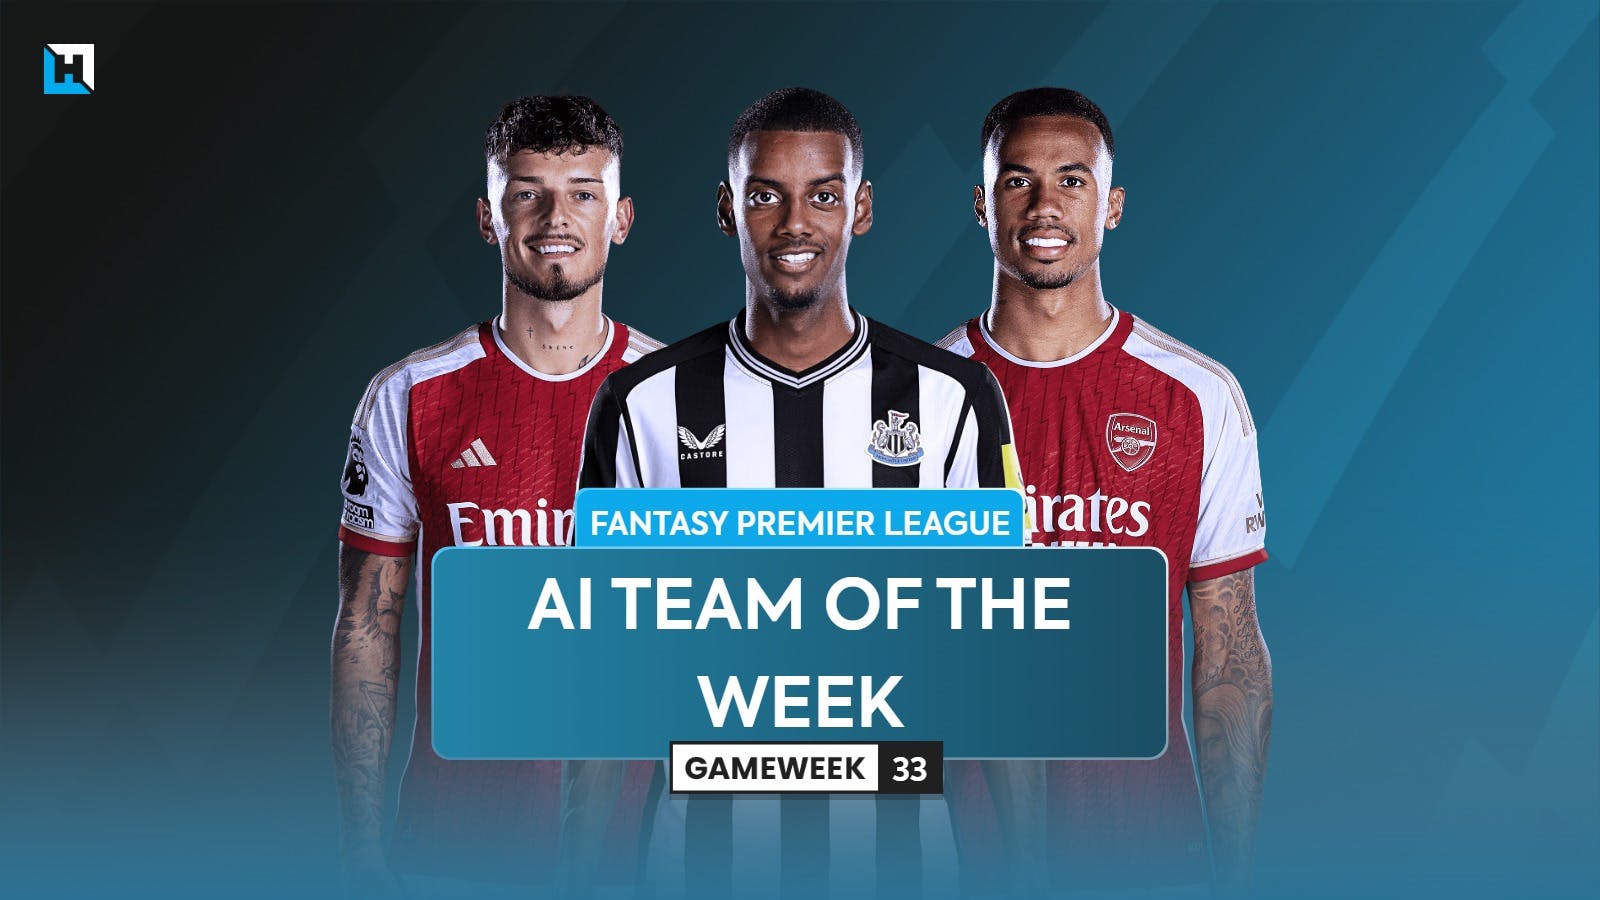 The best FPL team for Gameweek 33 according to Hub AI